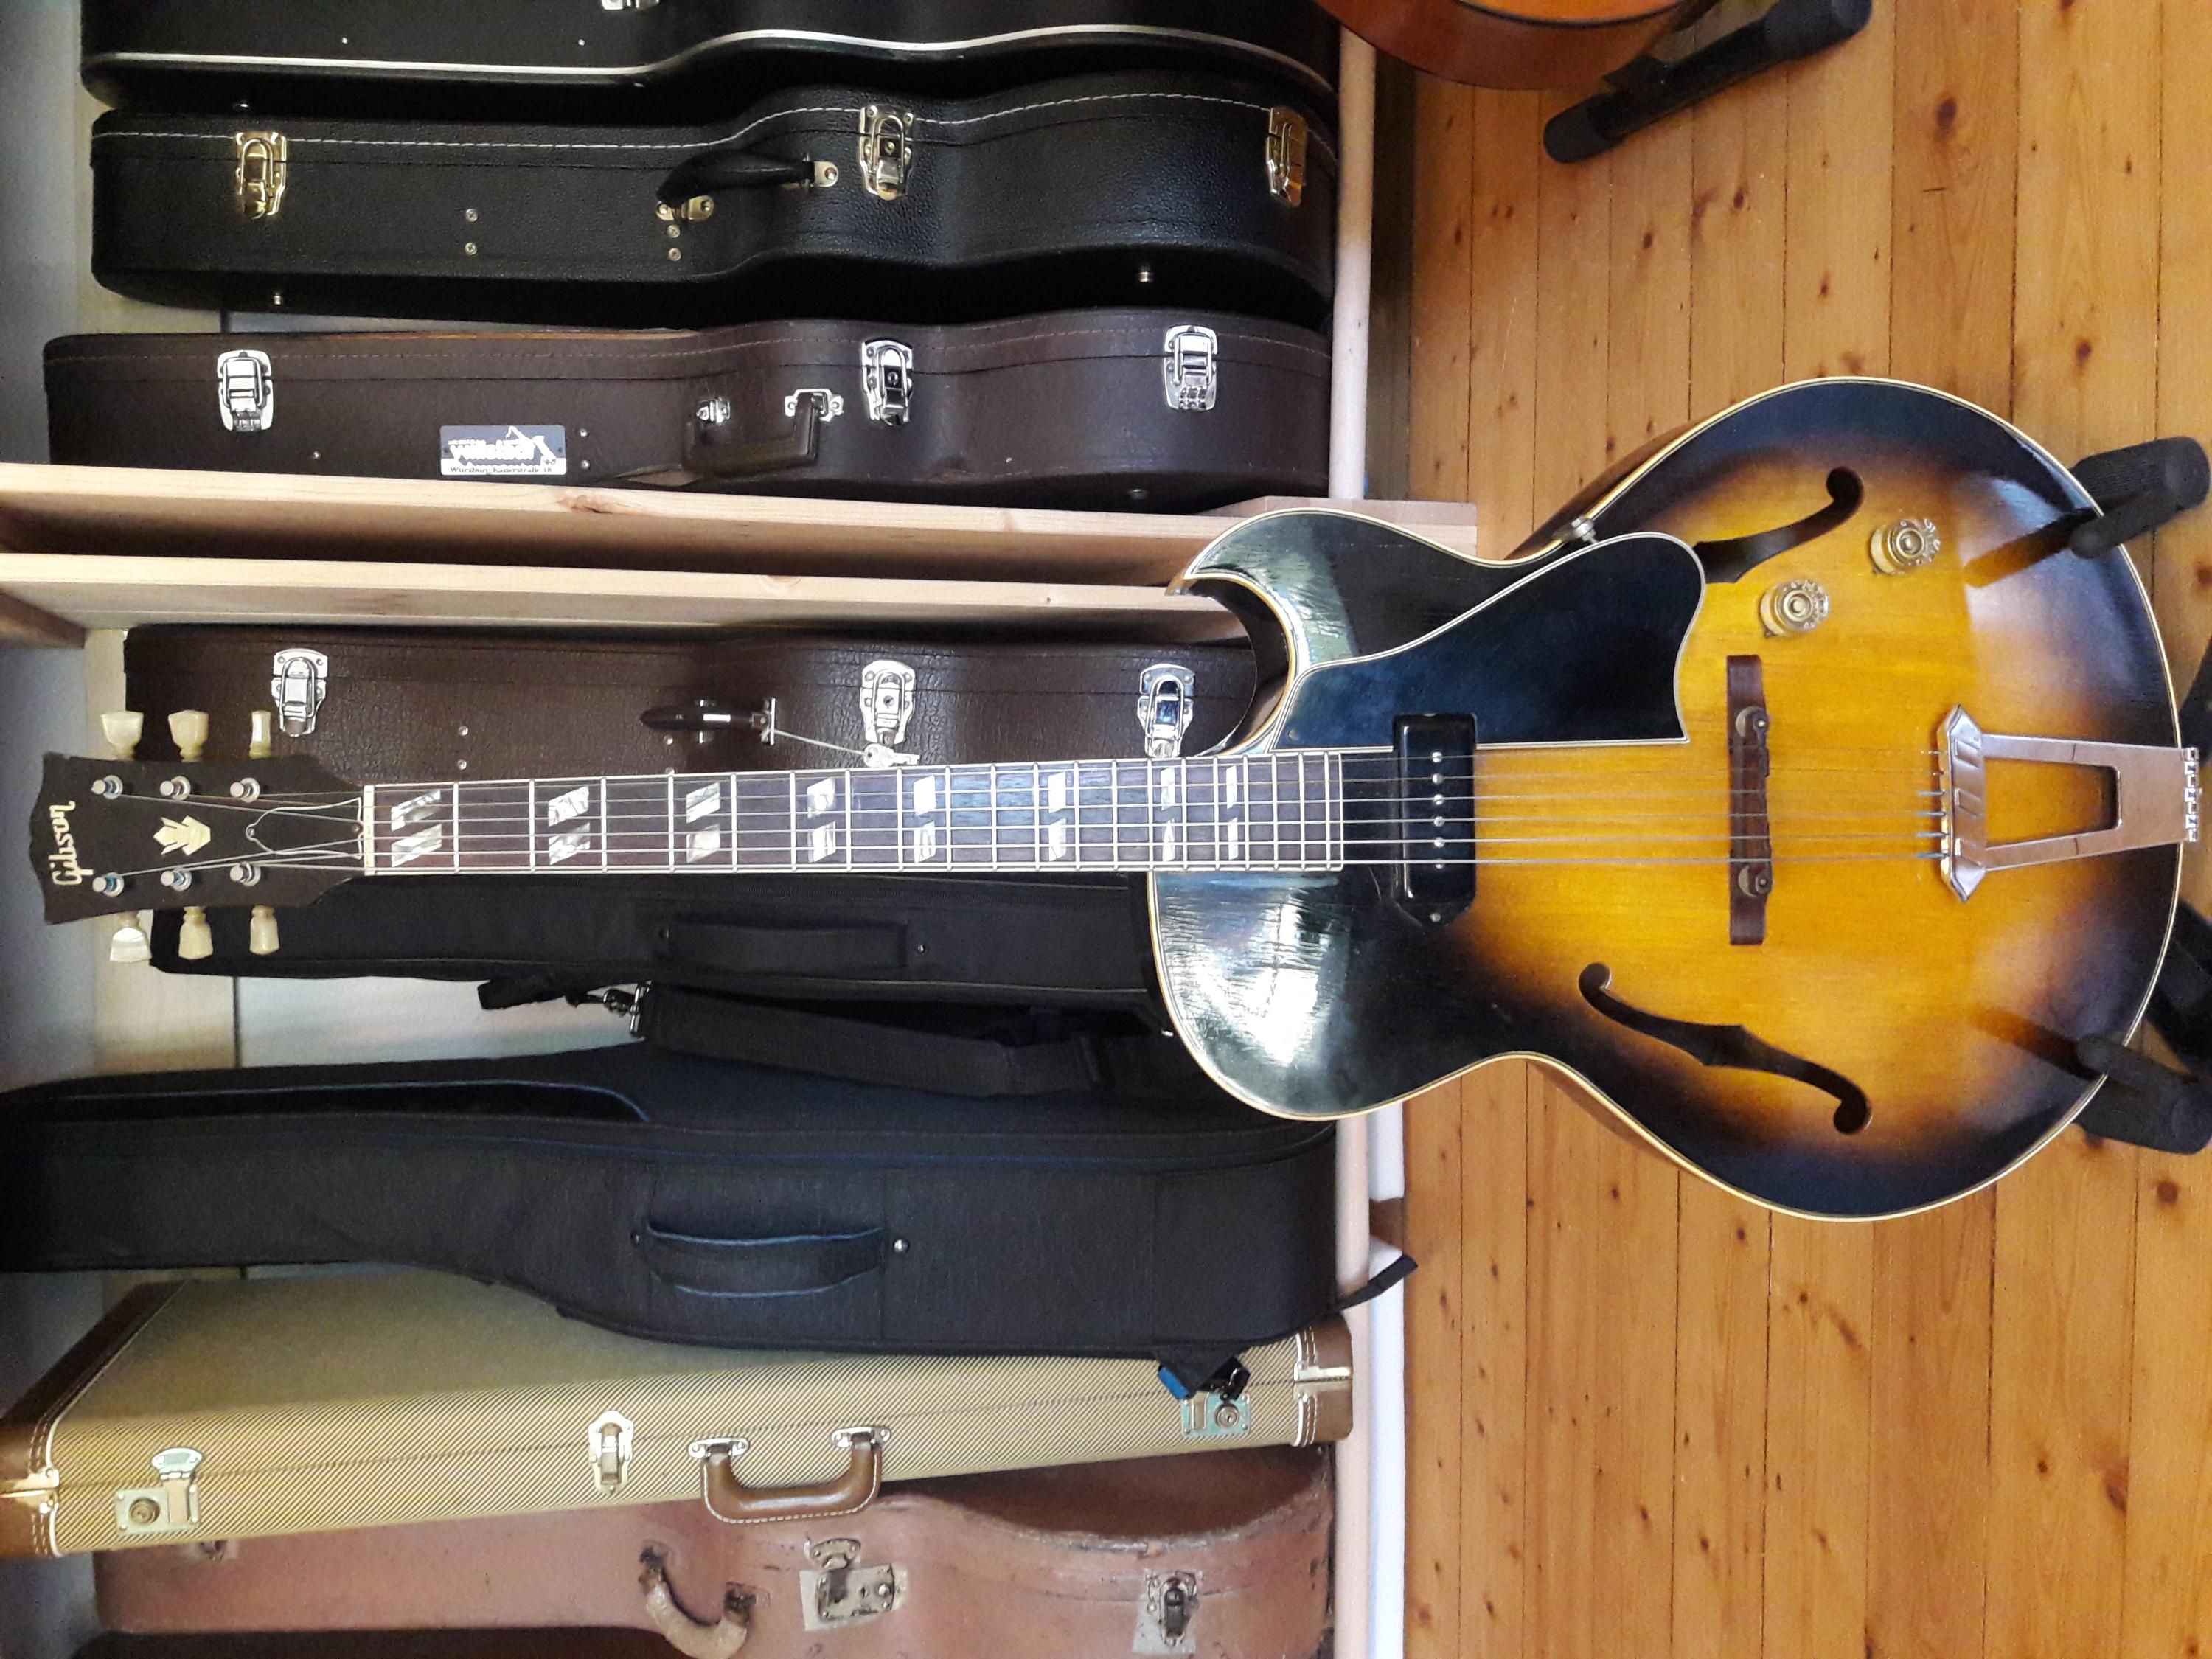 Thoughts On This Near Immaculate 1951 Gibson ES-175-20211022_084701-jpg